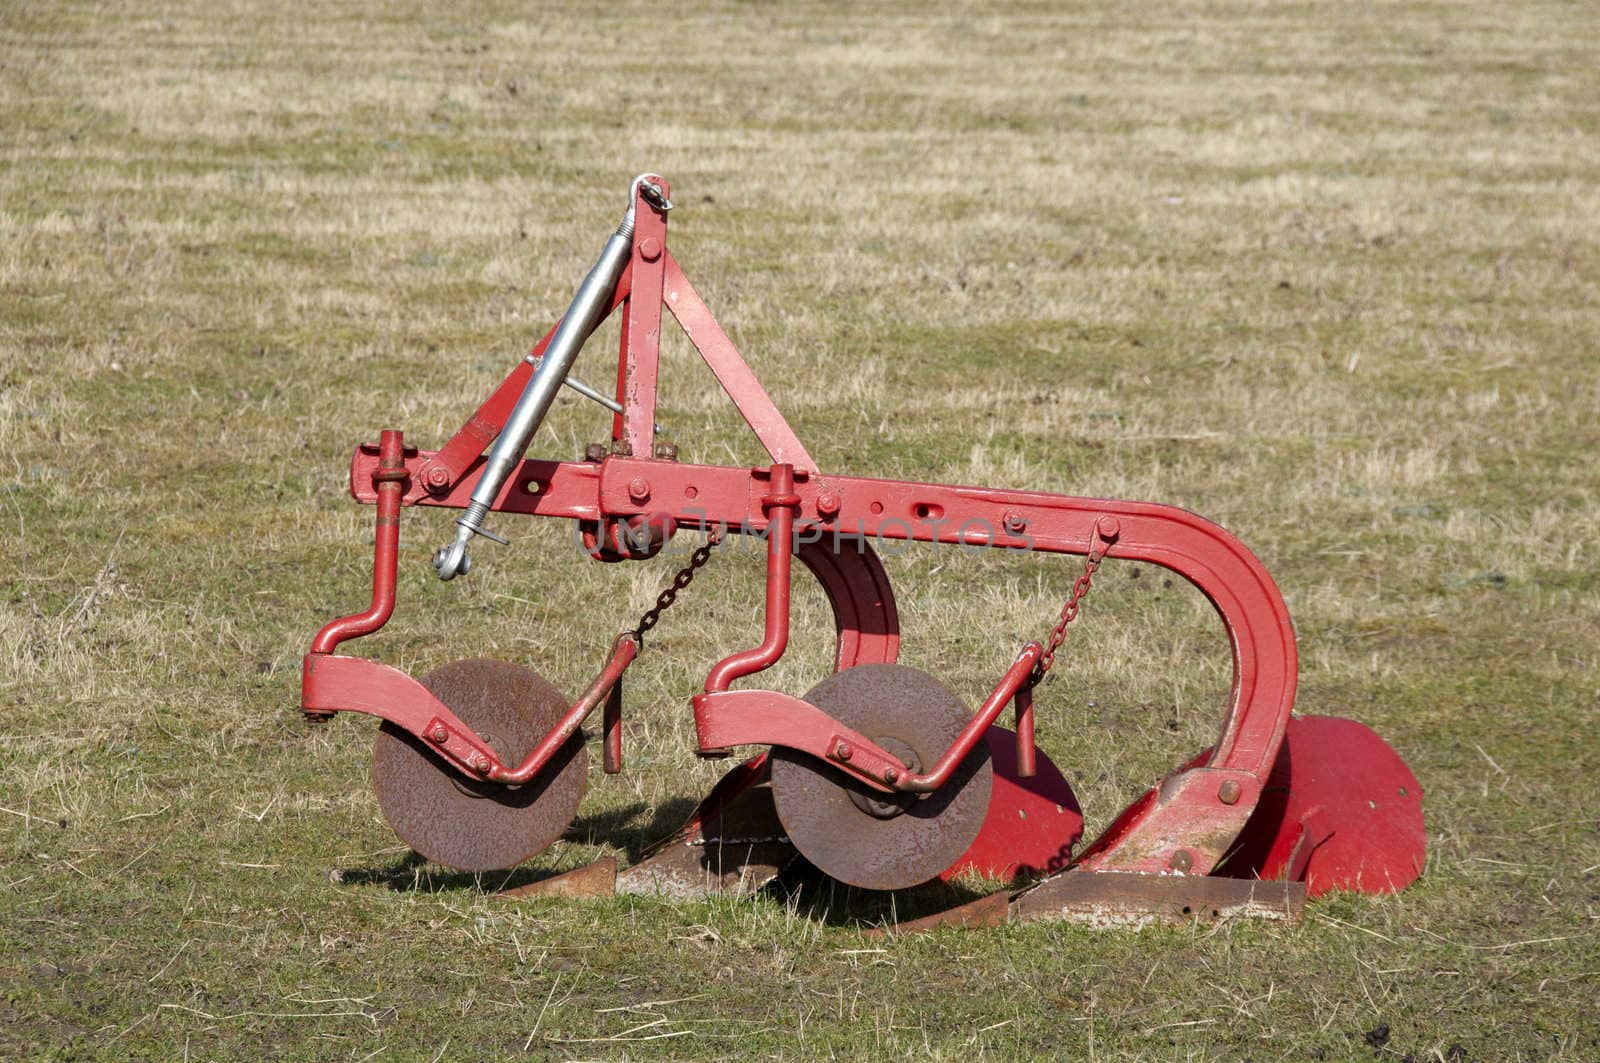 An old plough in a field of grass